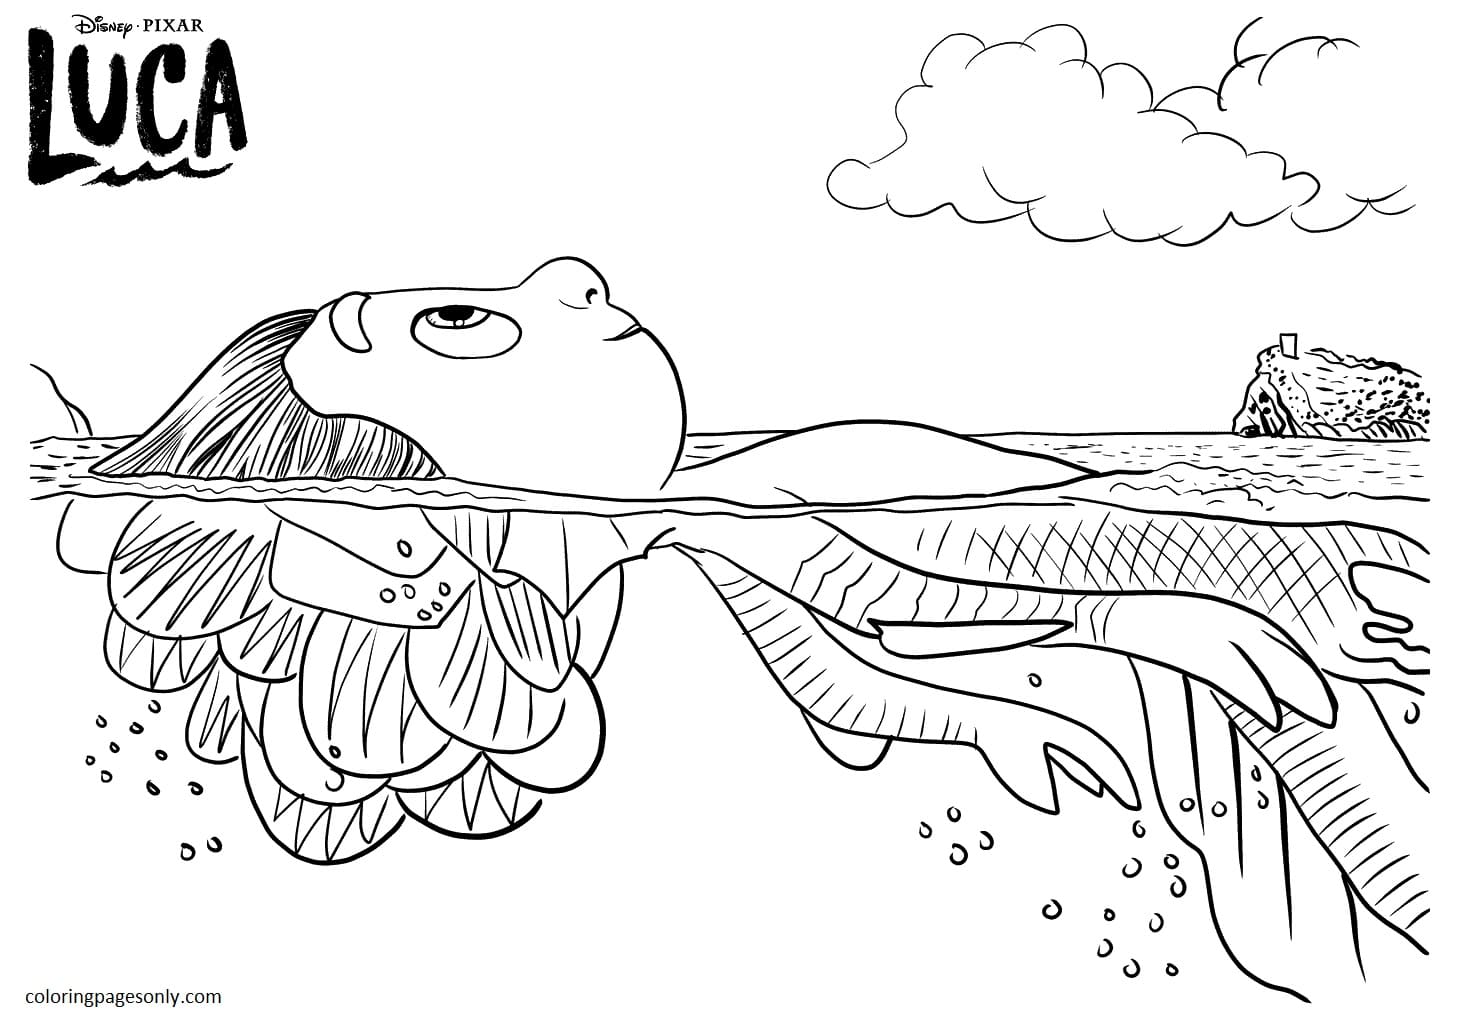 Luca coloring pages 2